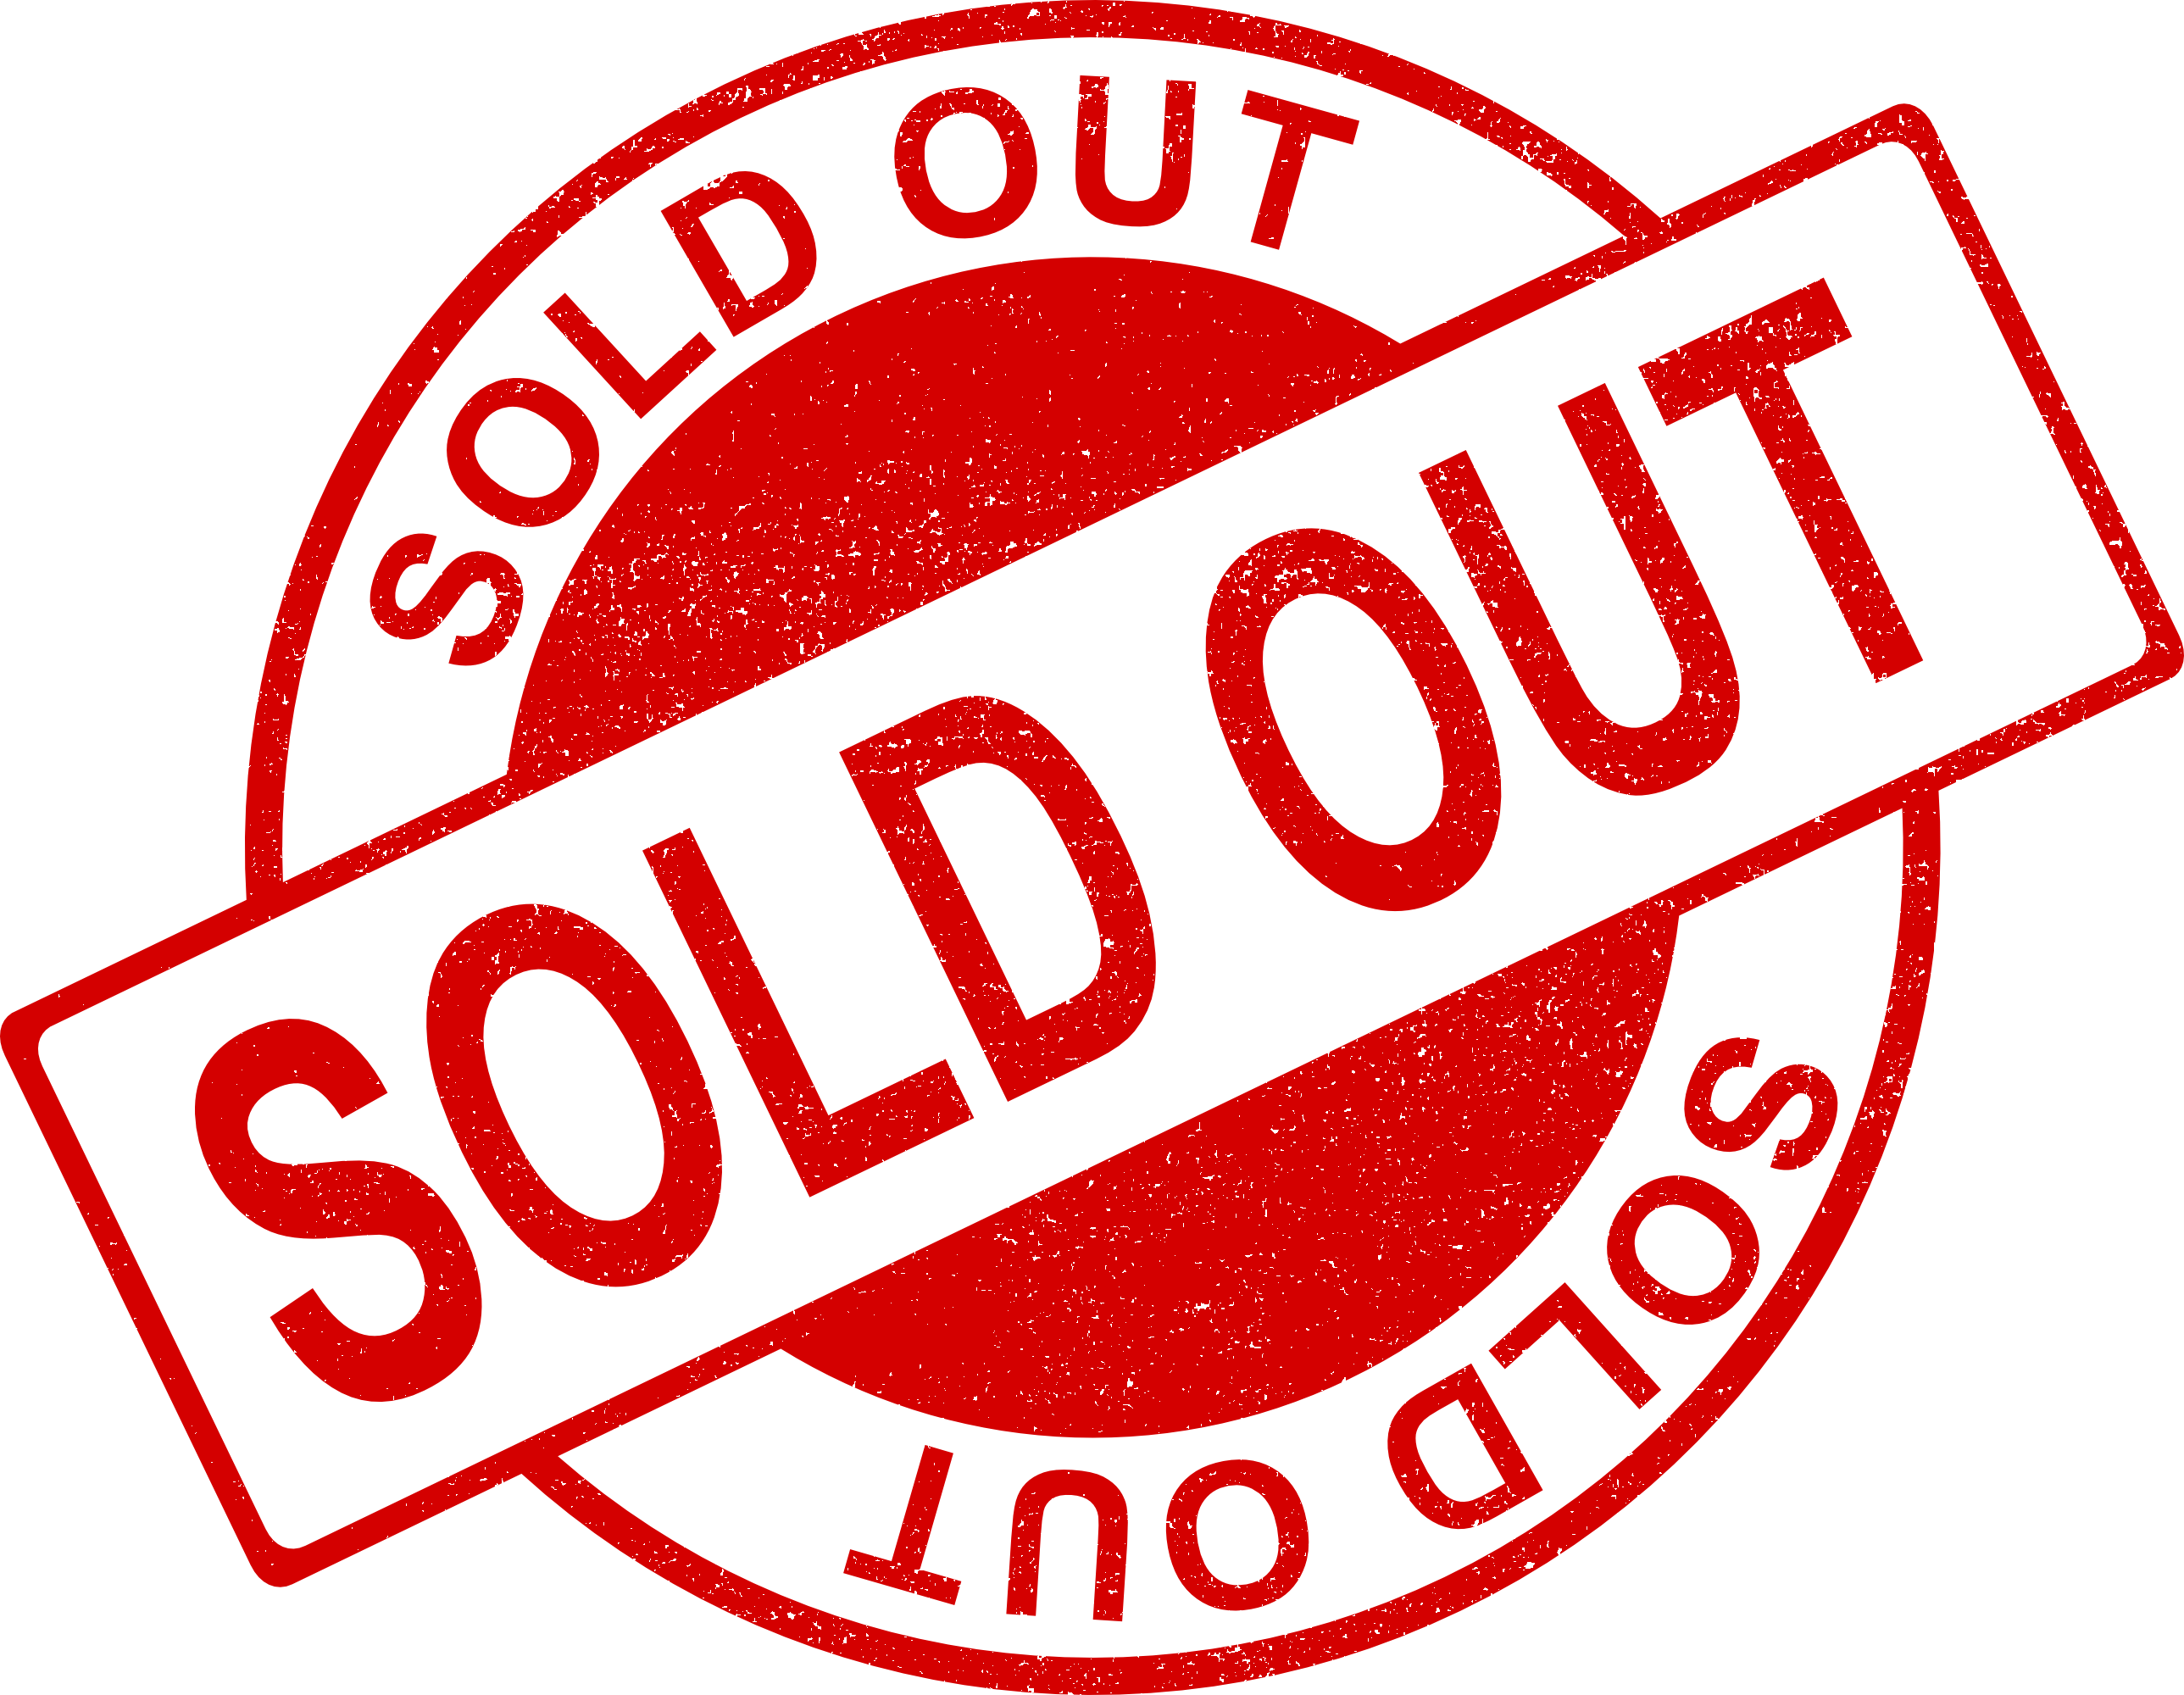 Sold Out Logo - Sold out logo png 4 » PNG Image